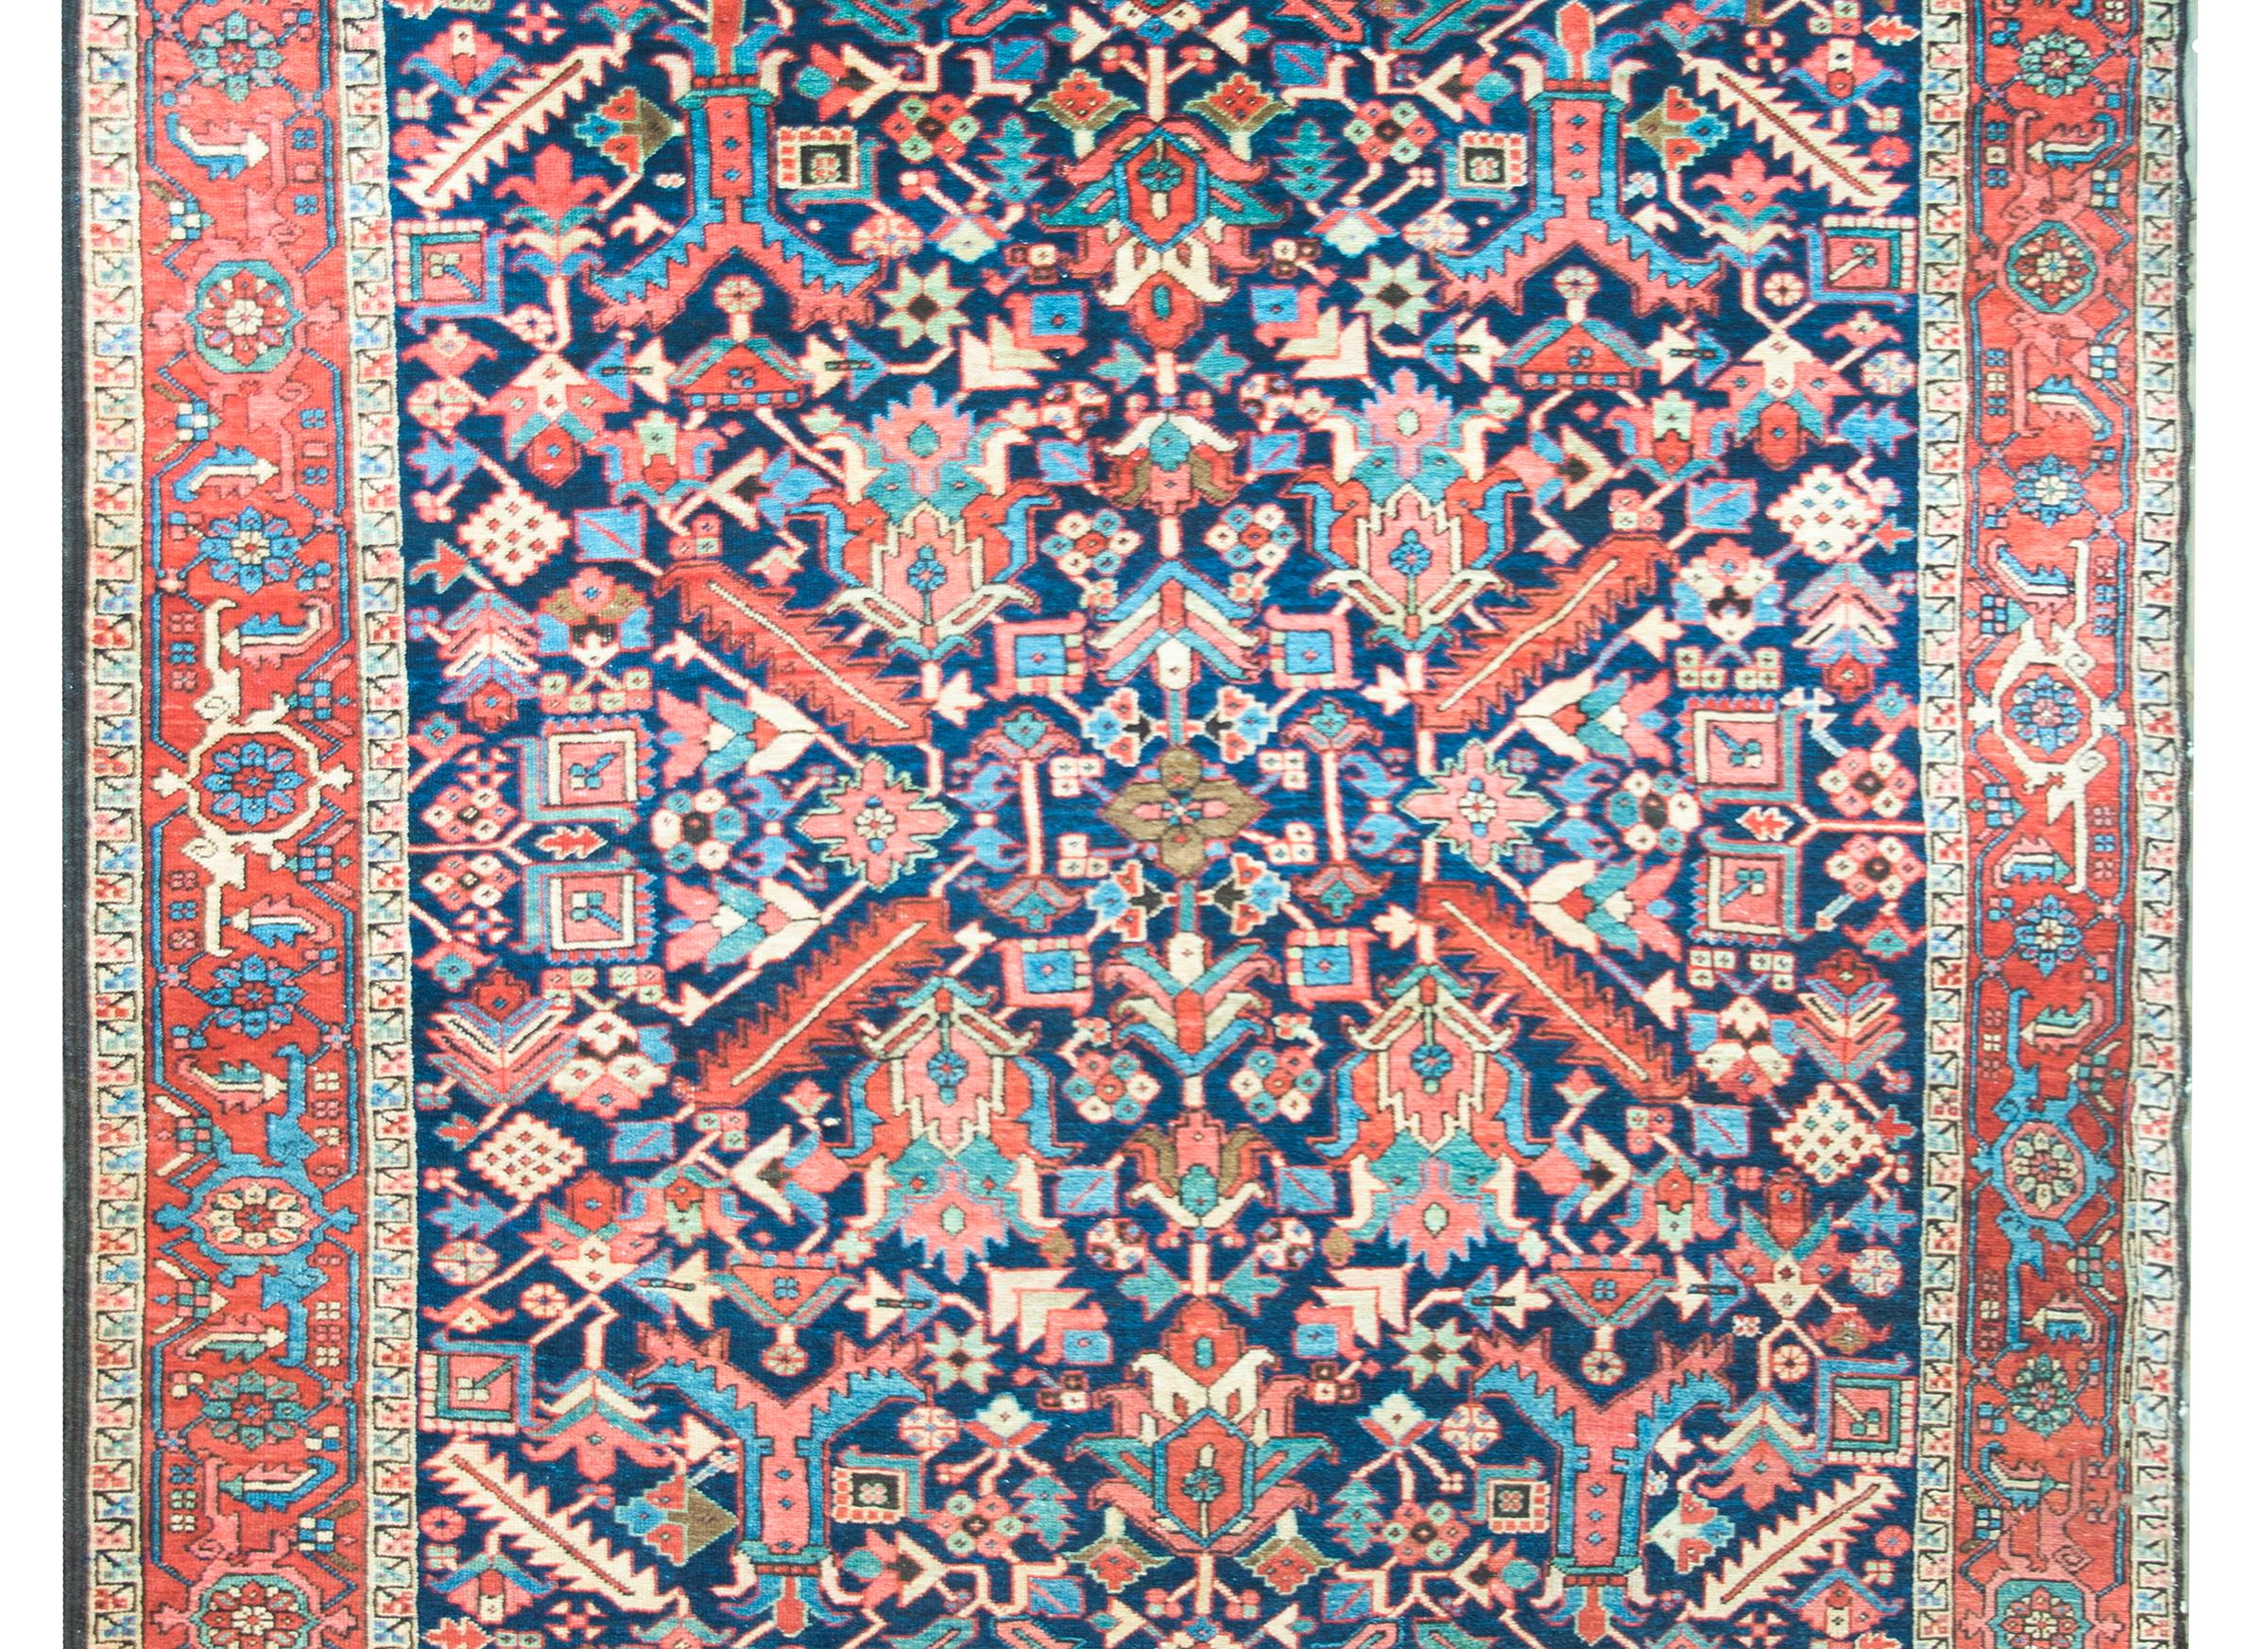 An incredible early 20th century Persian Heriz rug with an all-over mirrored densely woven floral pattern with large-scale flowers and leaves, and myriad stylized flowers, all woven in pink, turquoise, cream, and indigo, and set against a dark